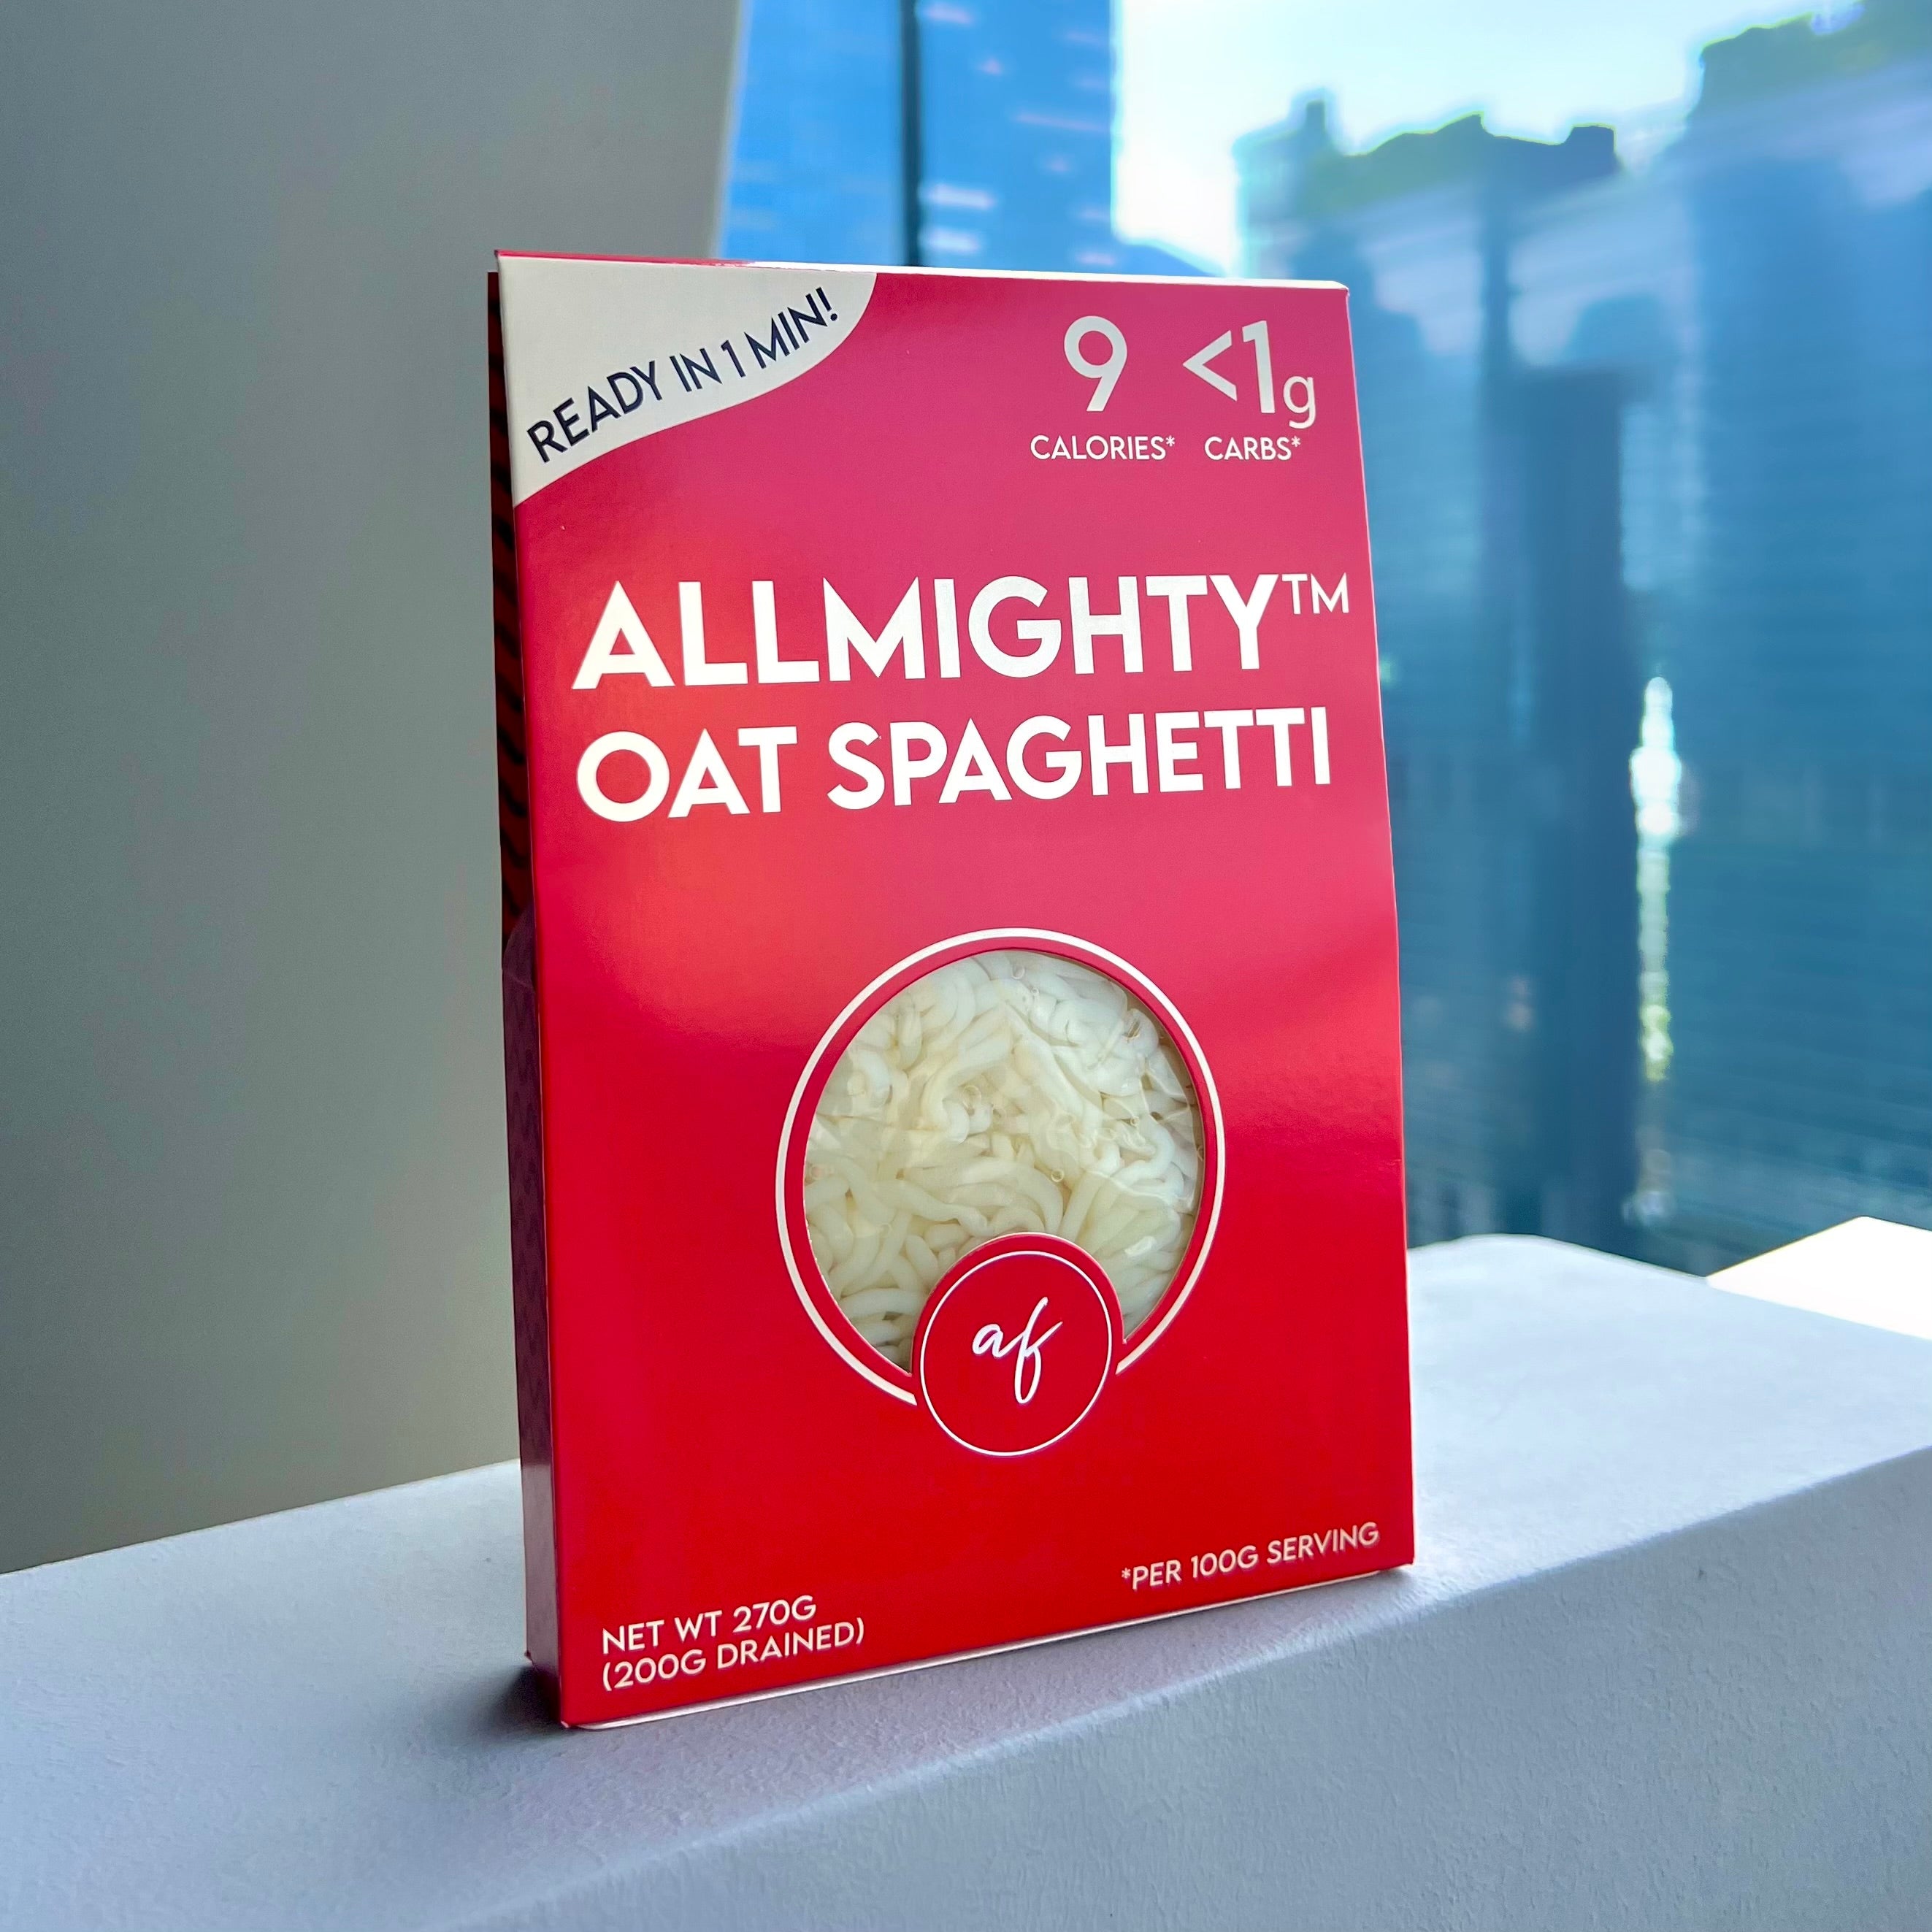 Allmighty Oat Spaghetti (3 PACK)